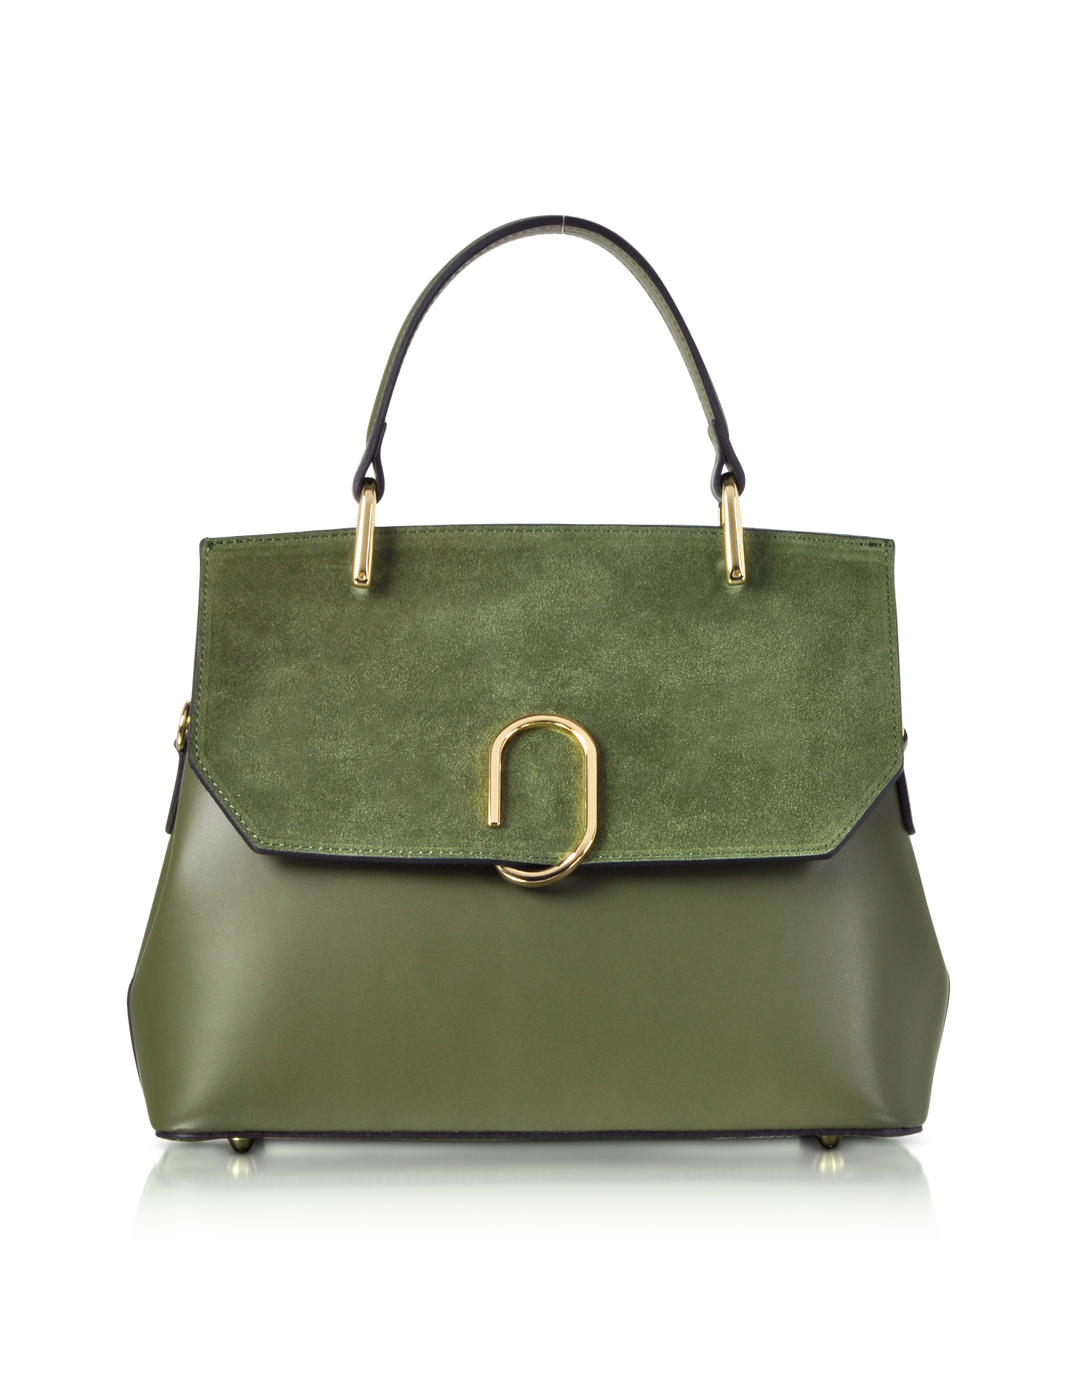 Green designer handbag with gold accents and black handle on white background